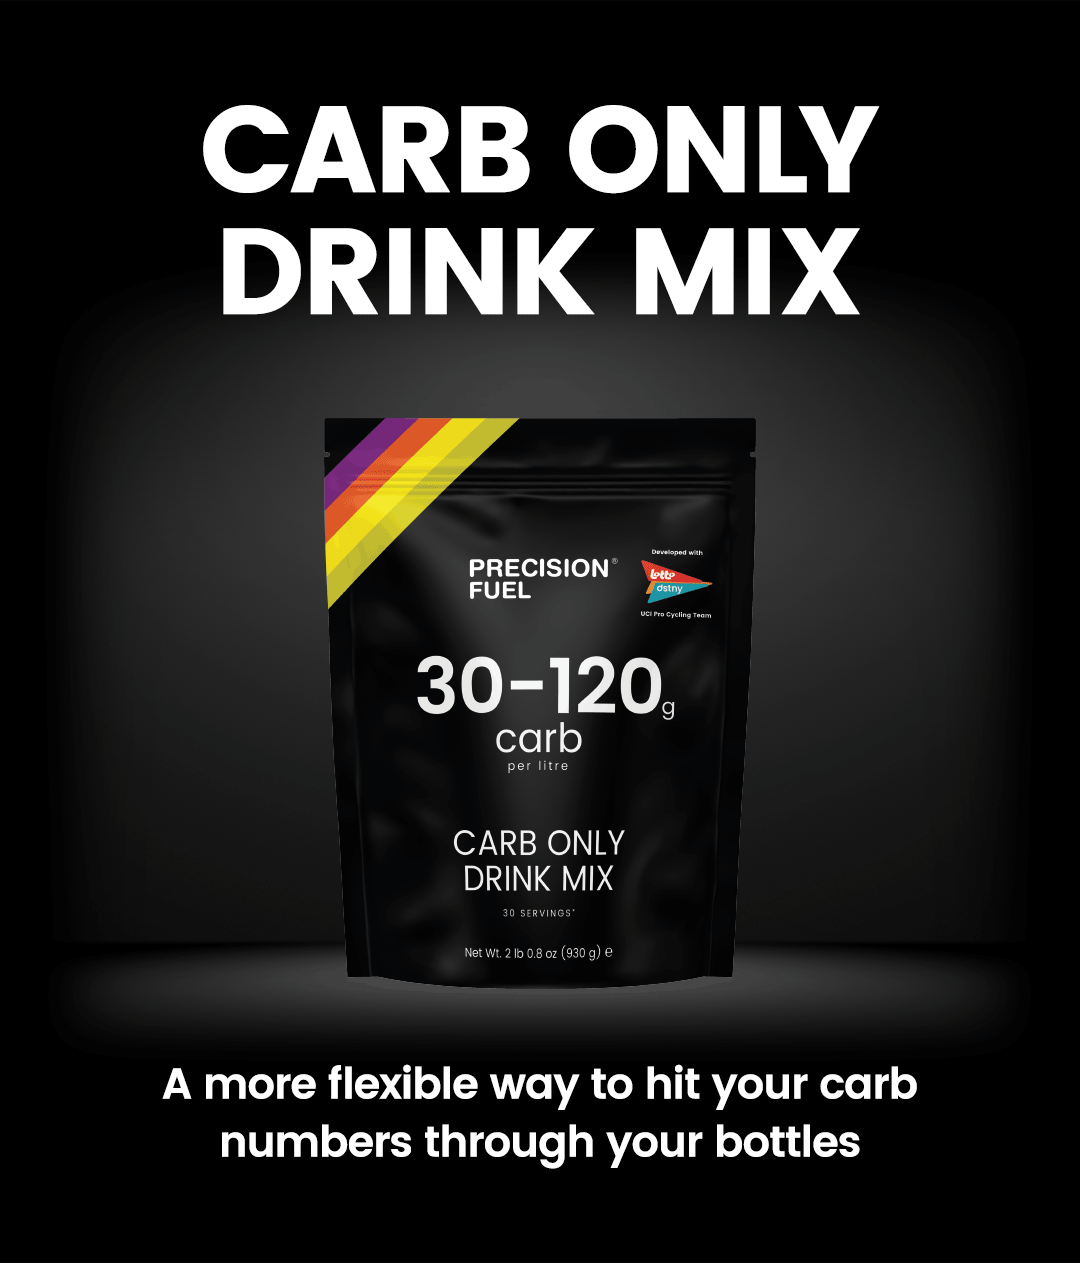 Carb Only Drink Mix